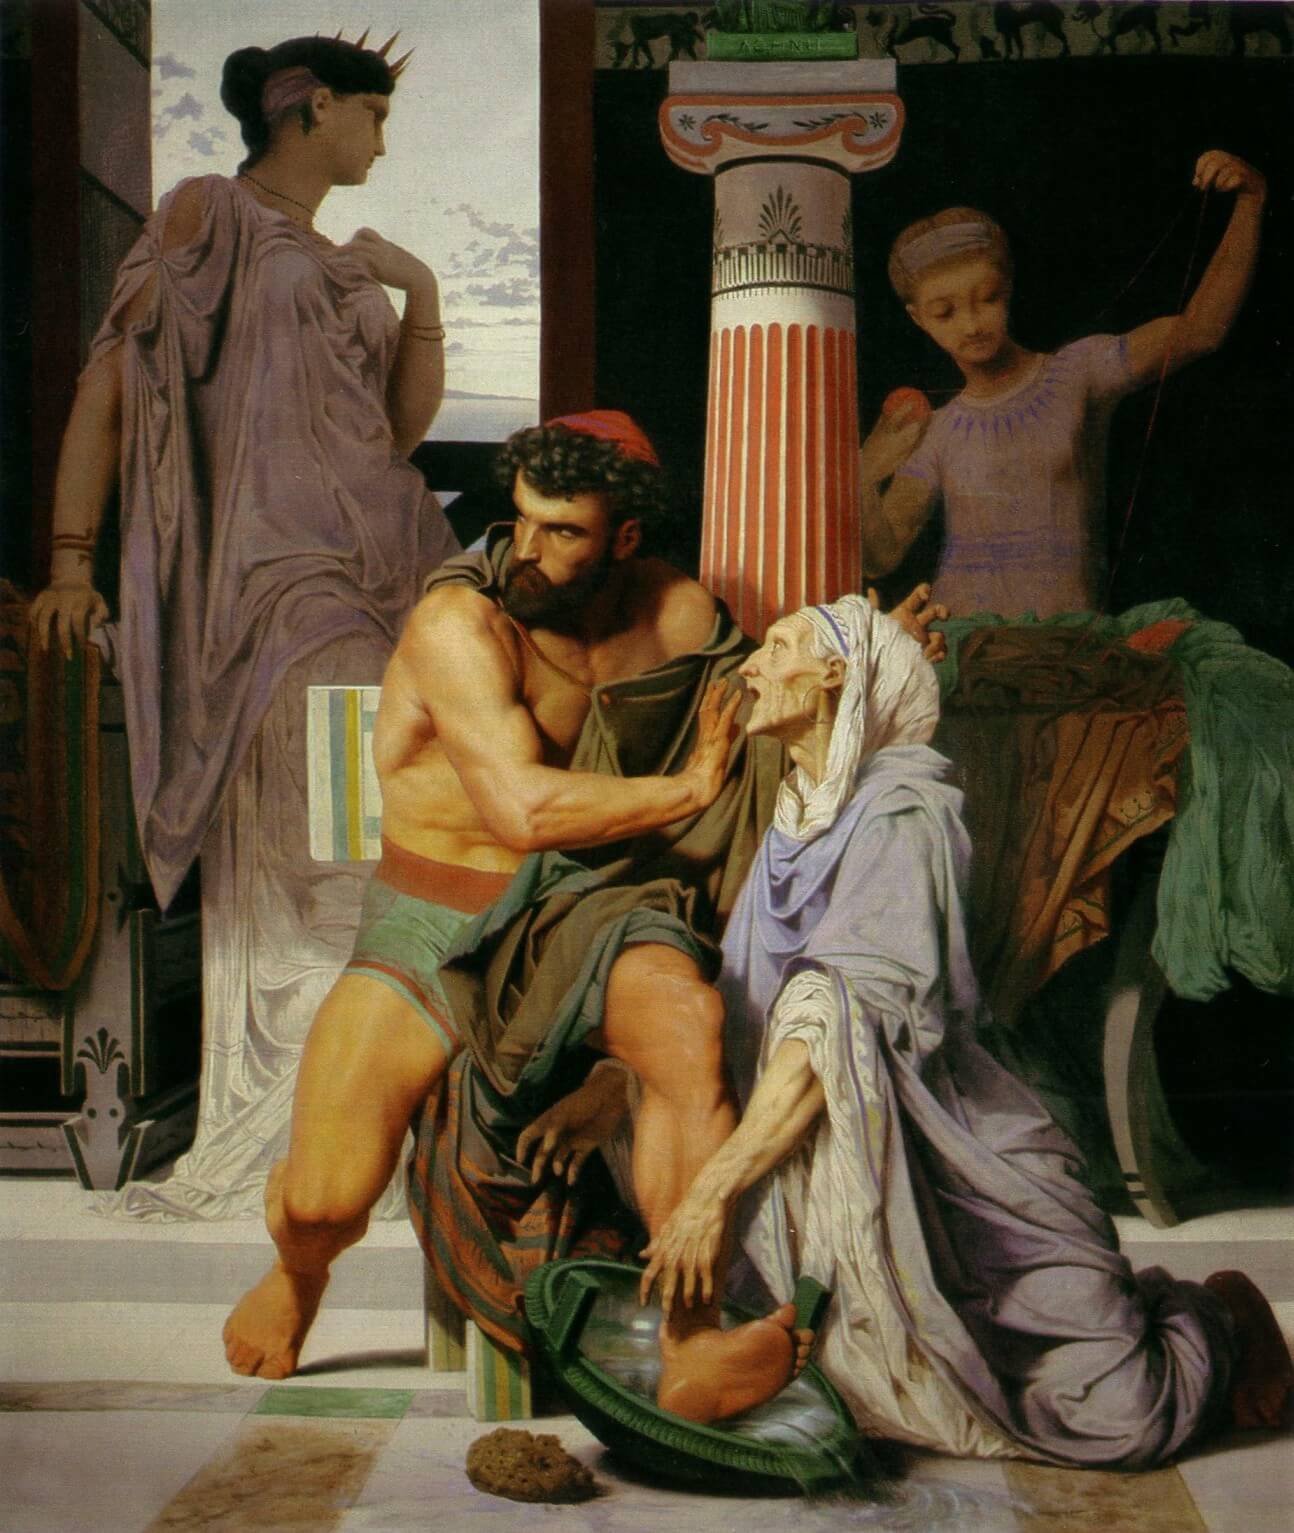 This painting represents Odysseus being recognized by his old nanny, Euryclee.